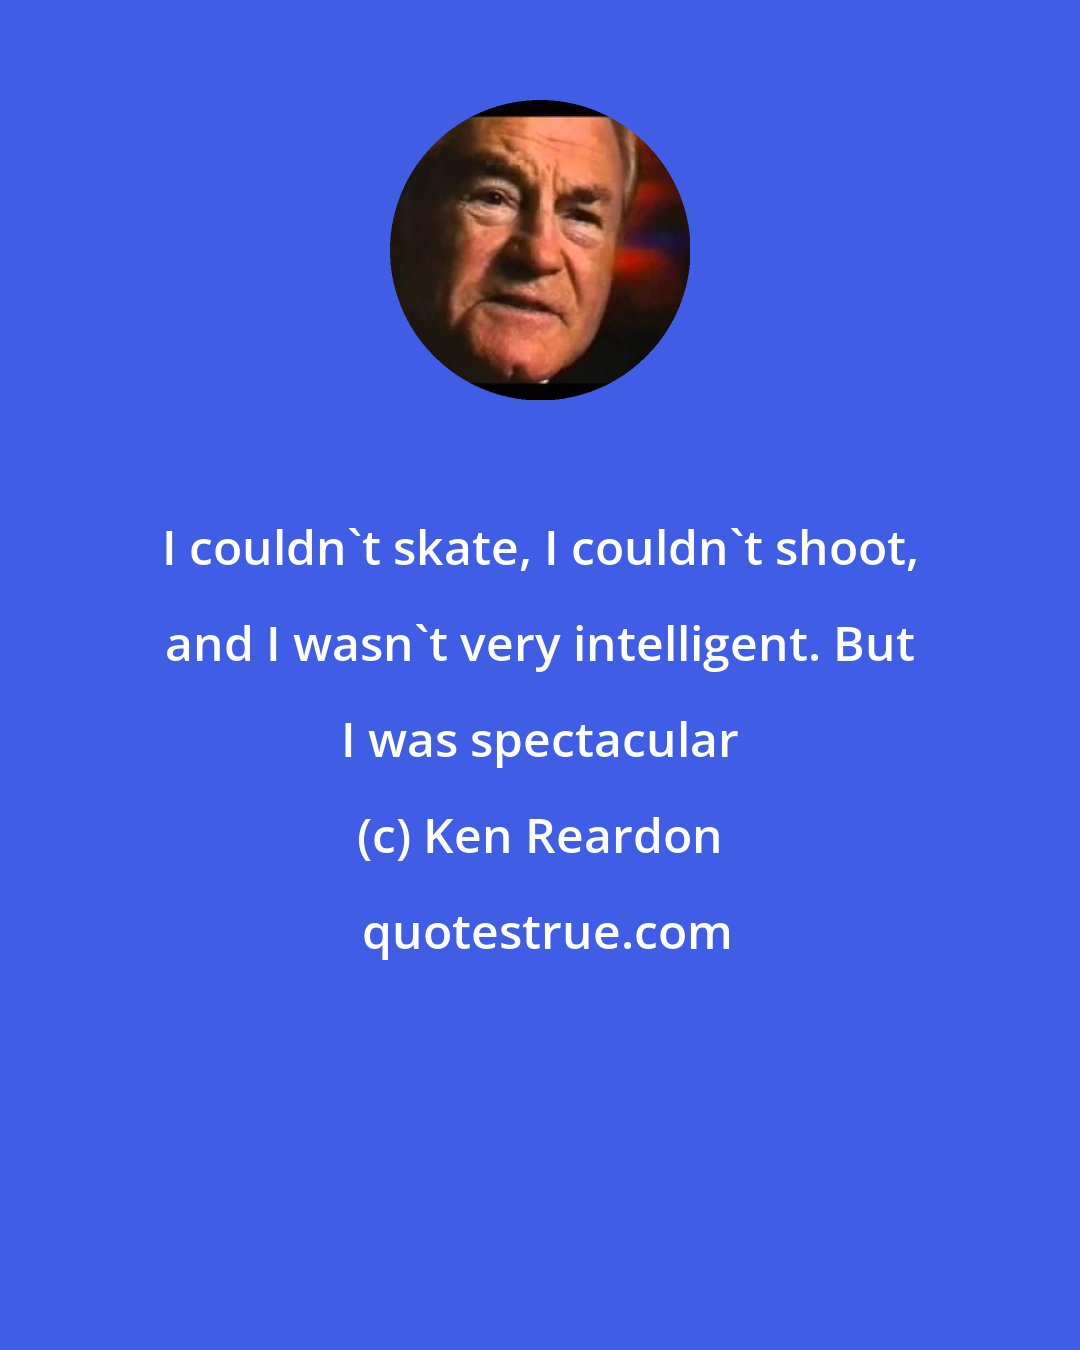 Ken Reardon: I couldn't skate, I couldn't shoot, and I wasn't very intelligent. But I was spectacular